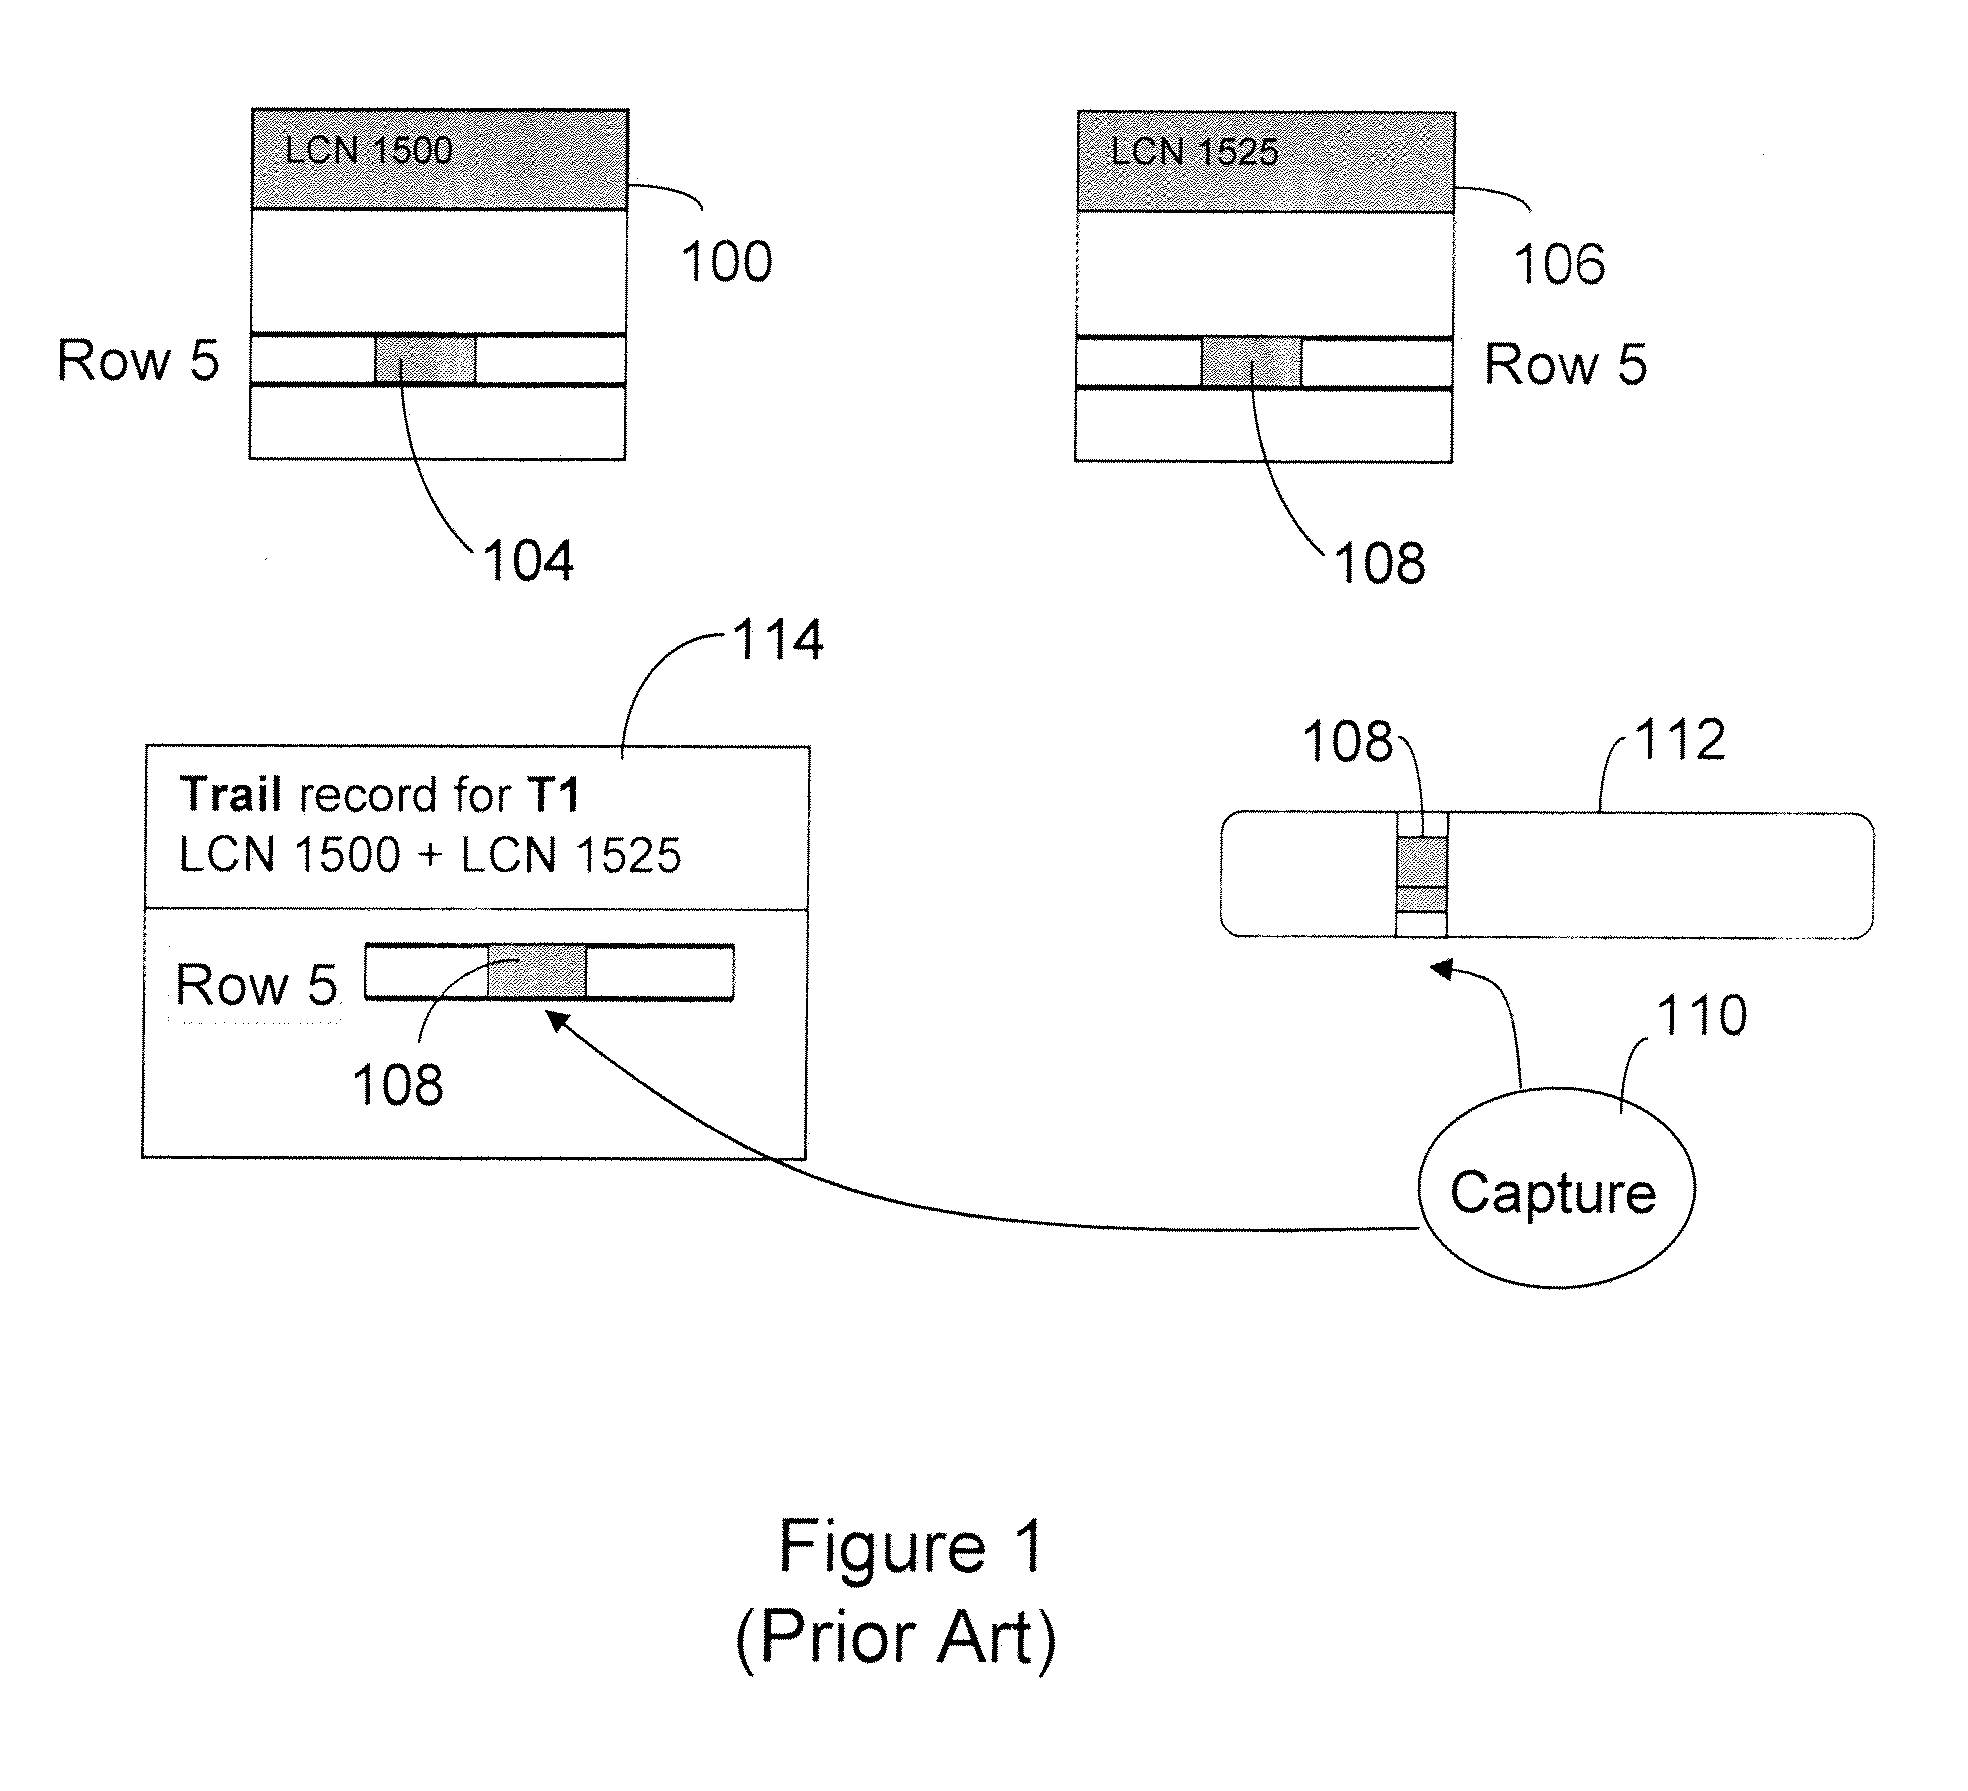 Apparatus and method for read consistency in a log mining system